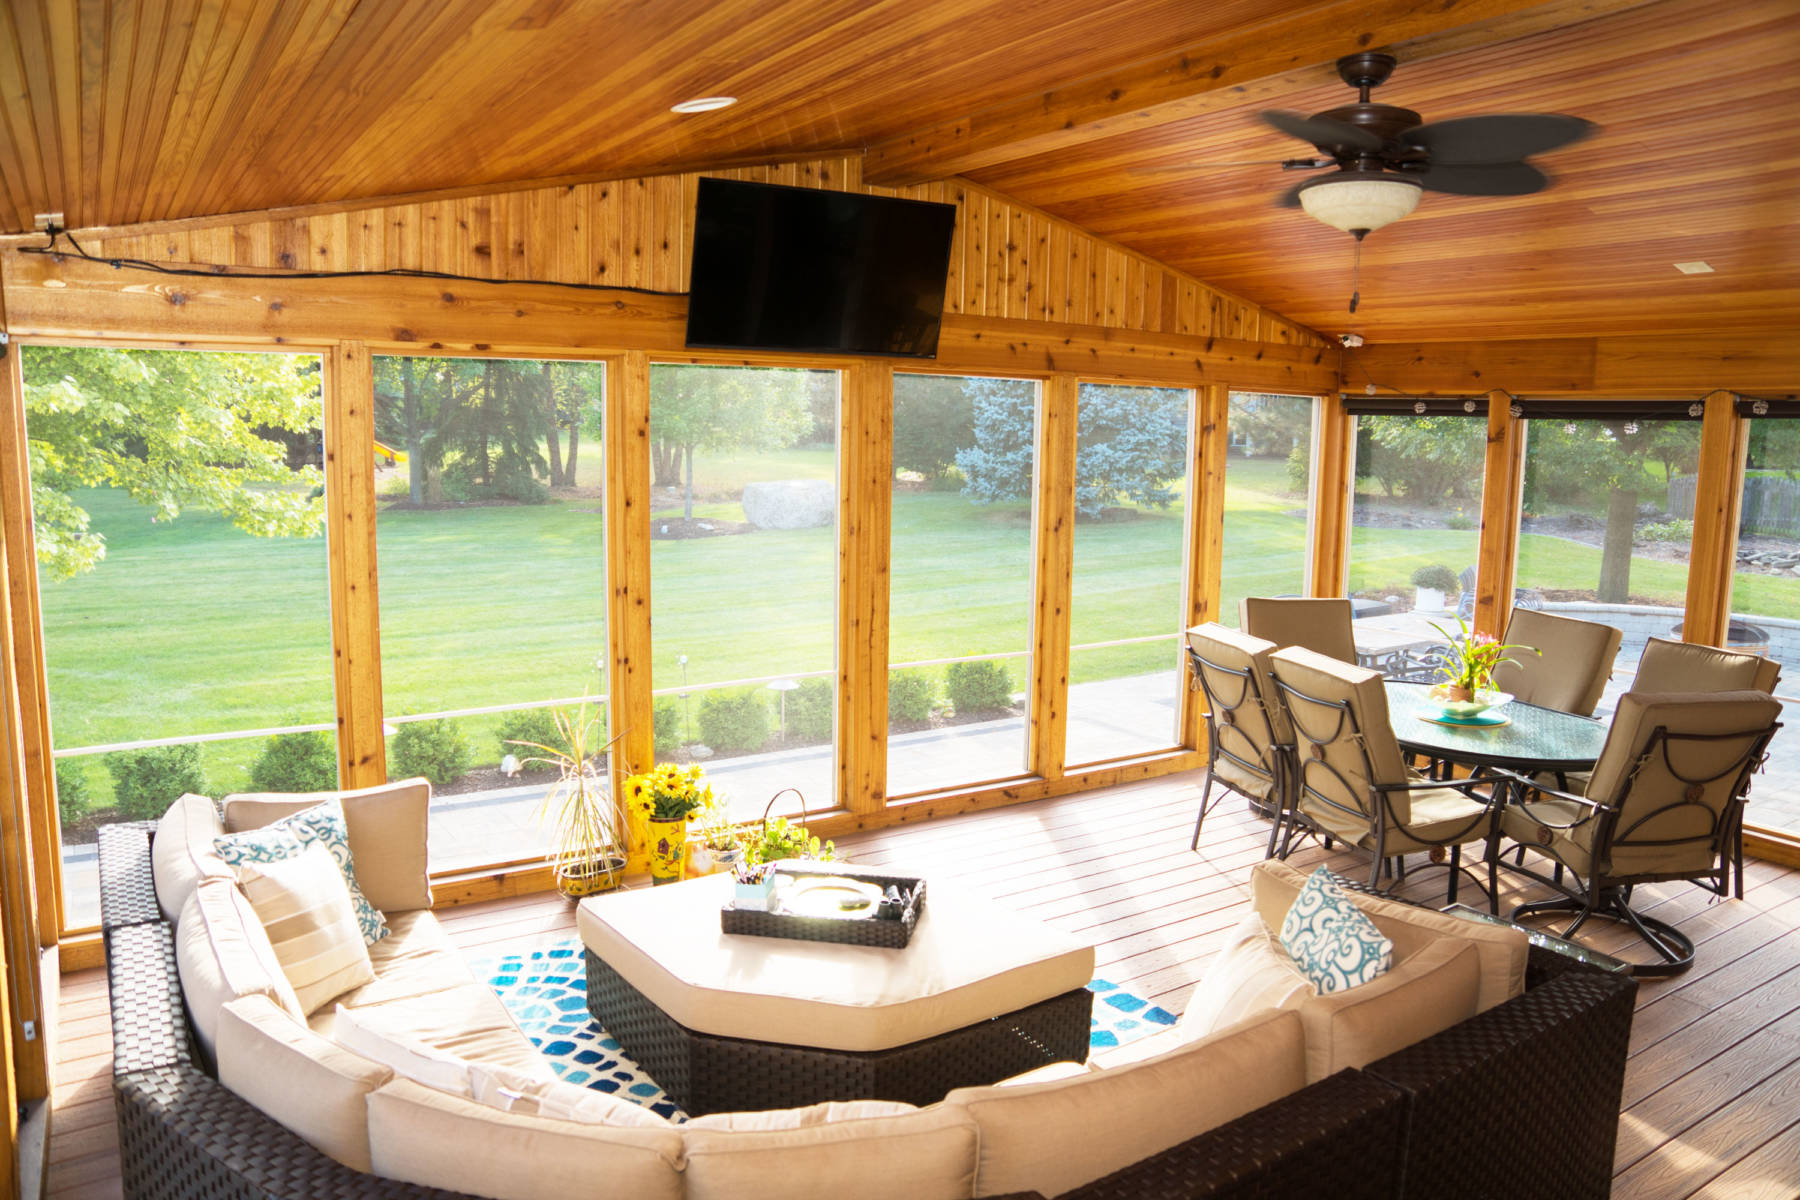 sun room with cedar walls and ceiling